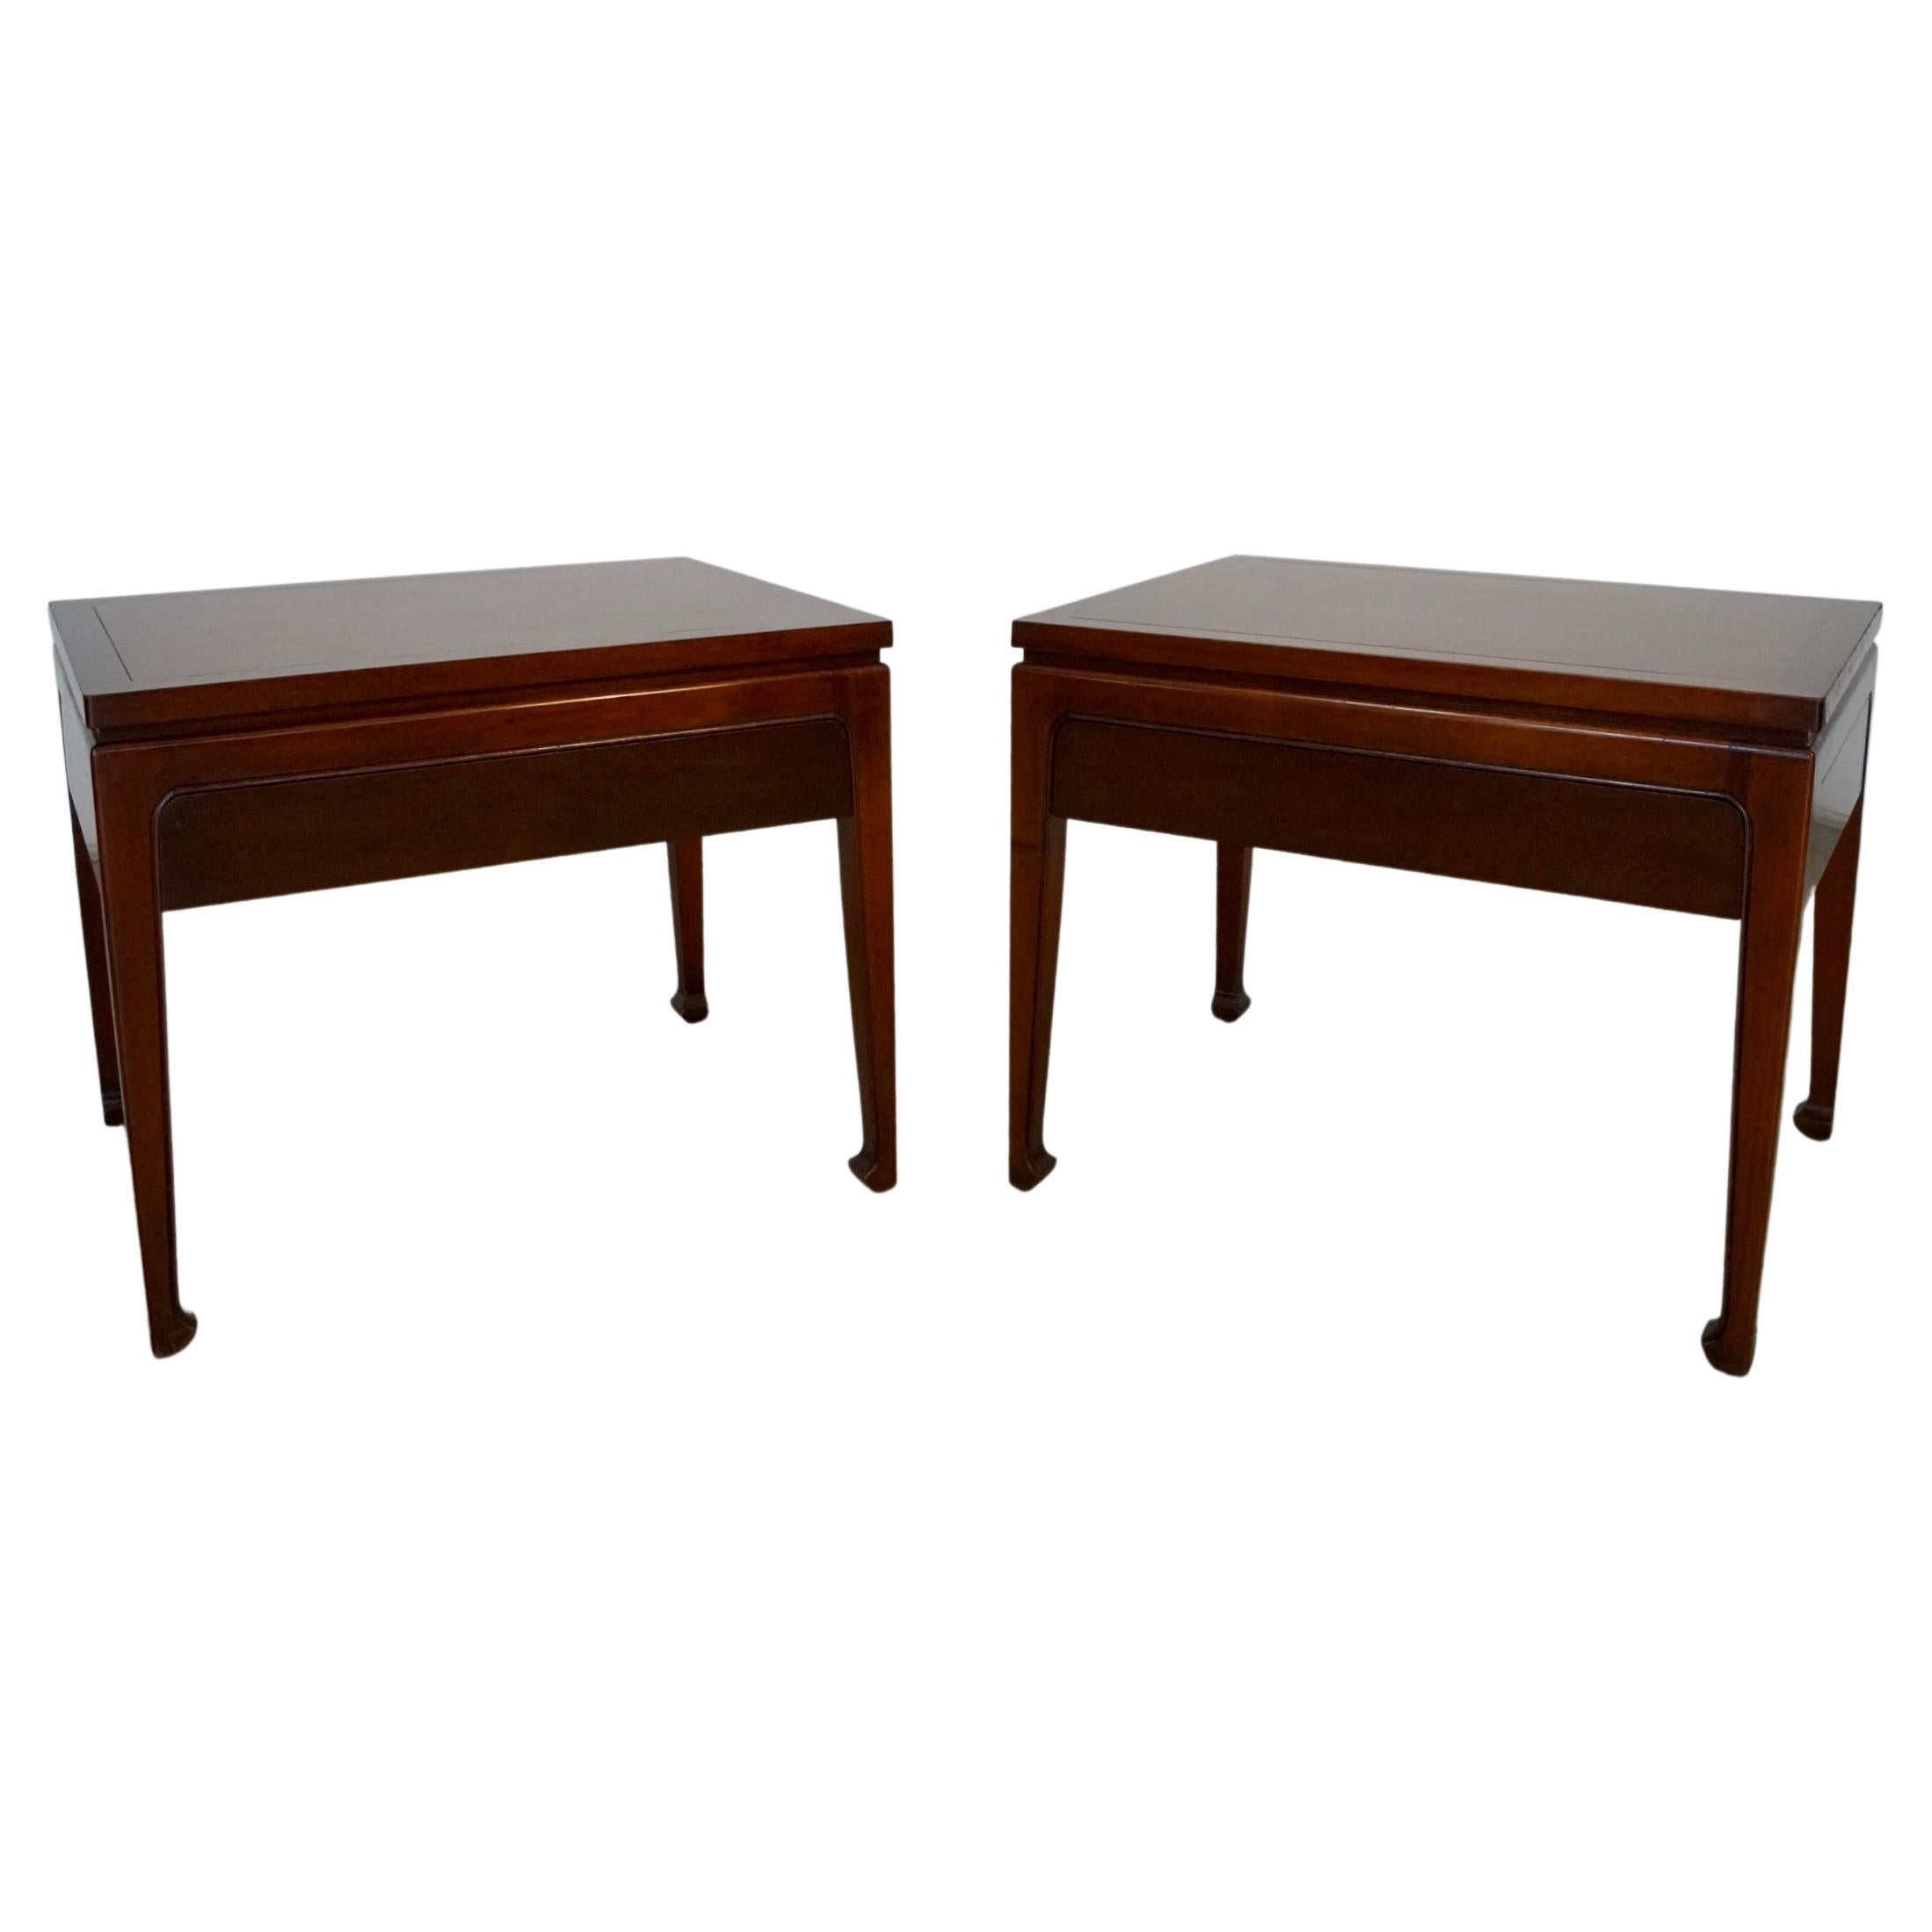 1950's Mid-Century Modern Fine Arts Furniture Nightstands / Side Tables - A Pair